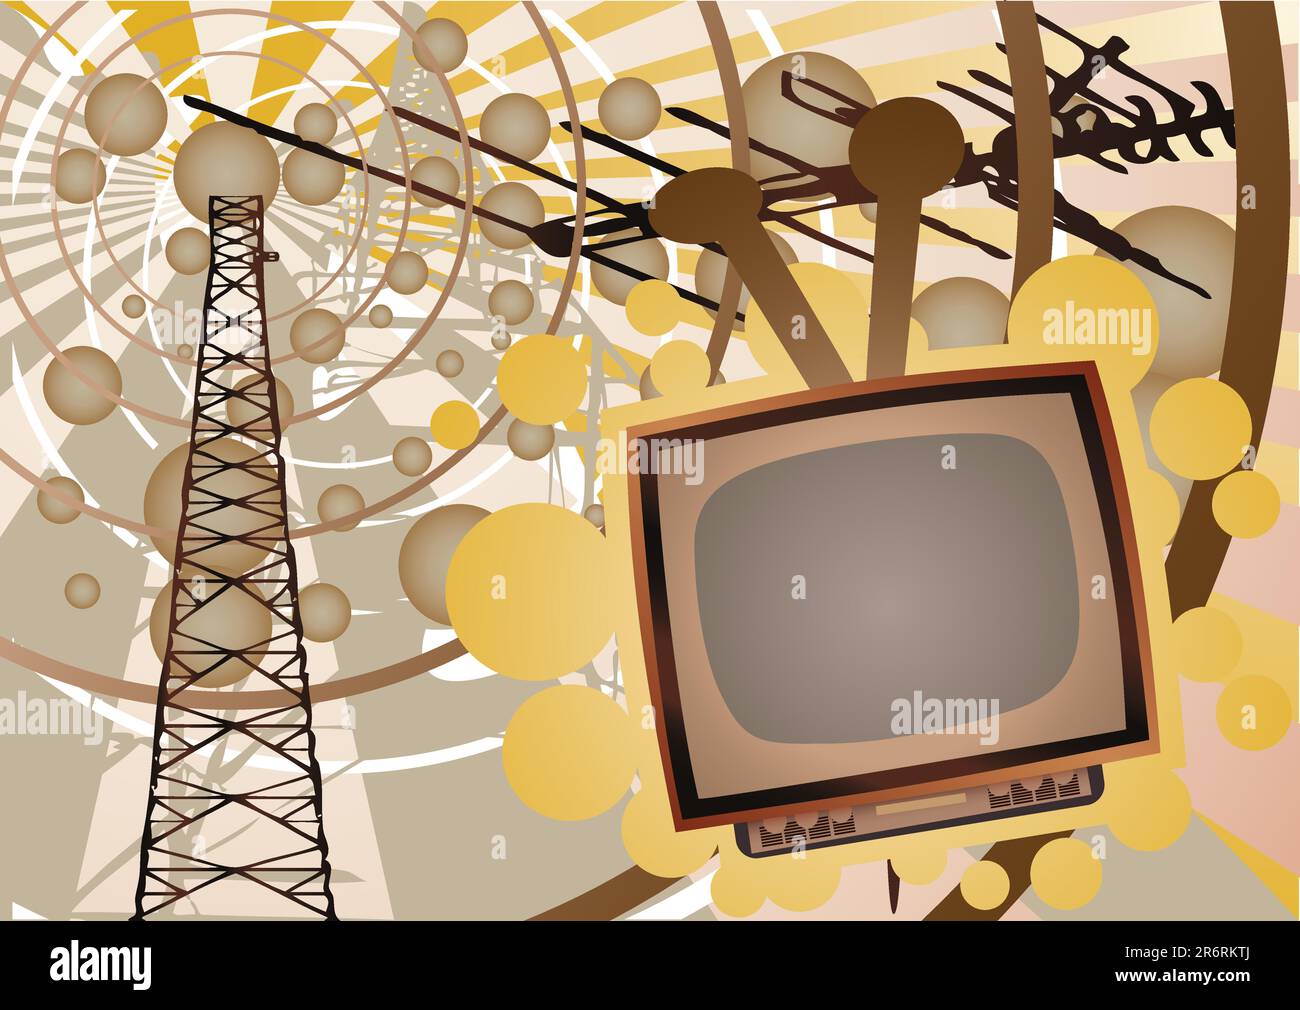 illustration vector of old TV Stock Vector